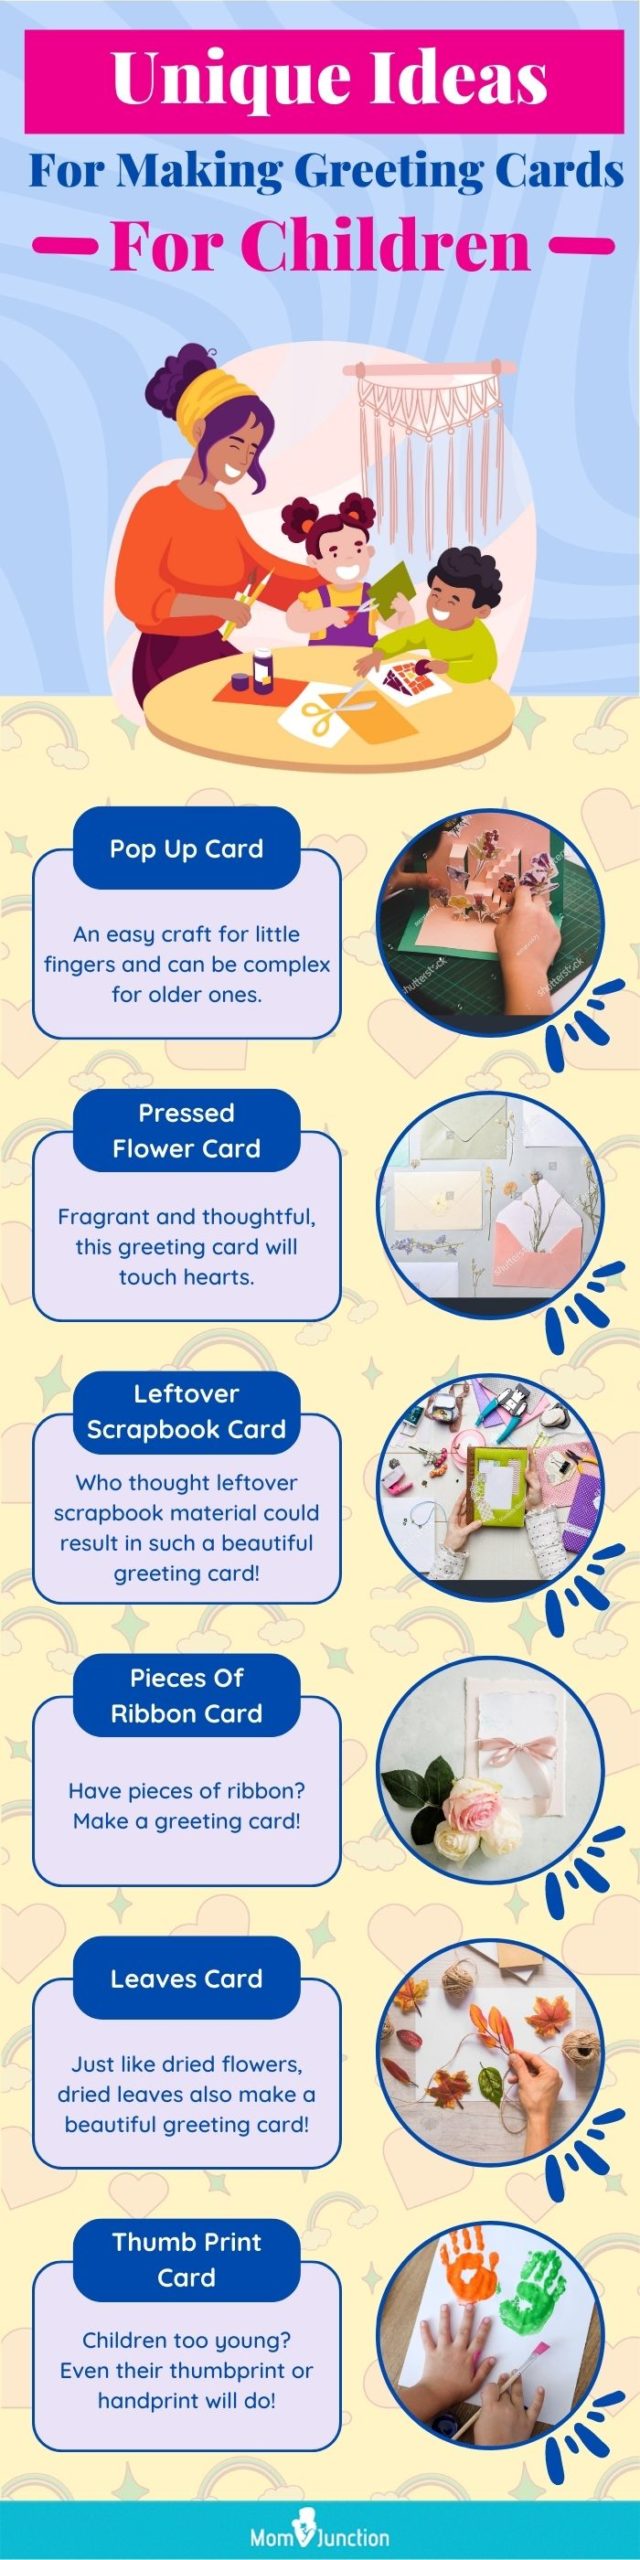 unique ideas for making greeting cards for children [infographic]